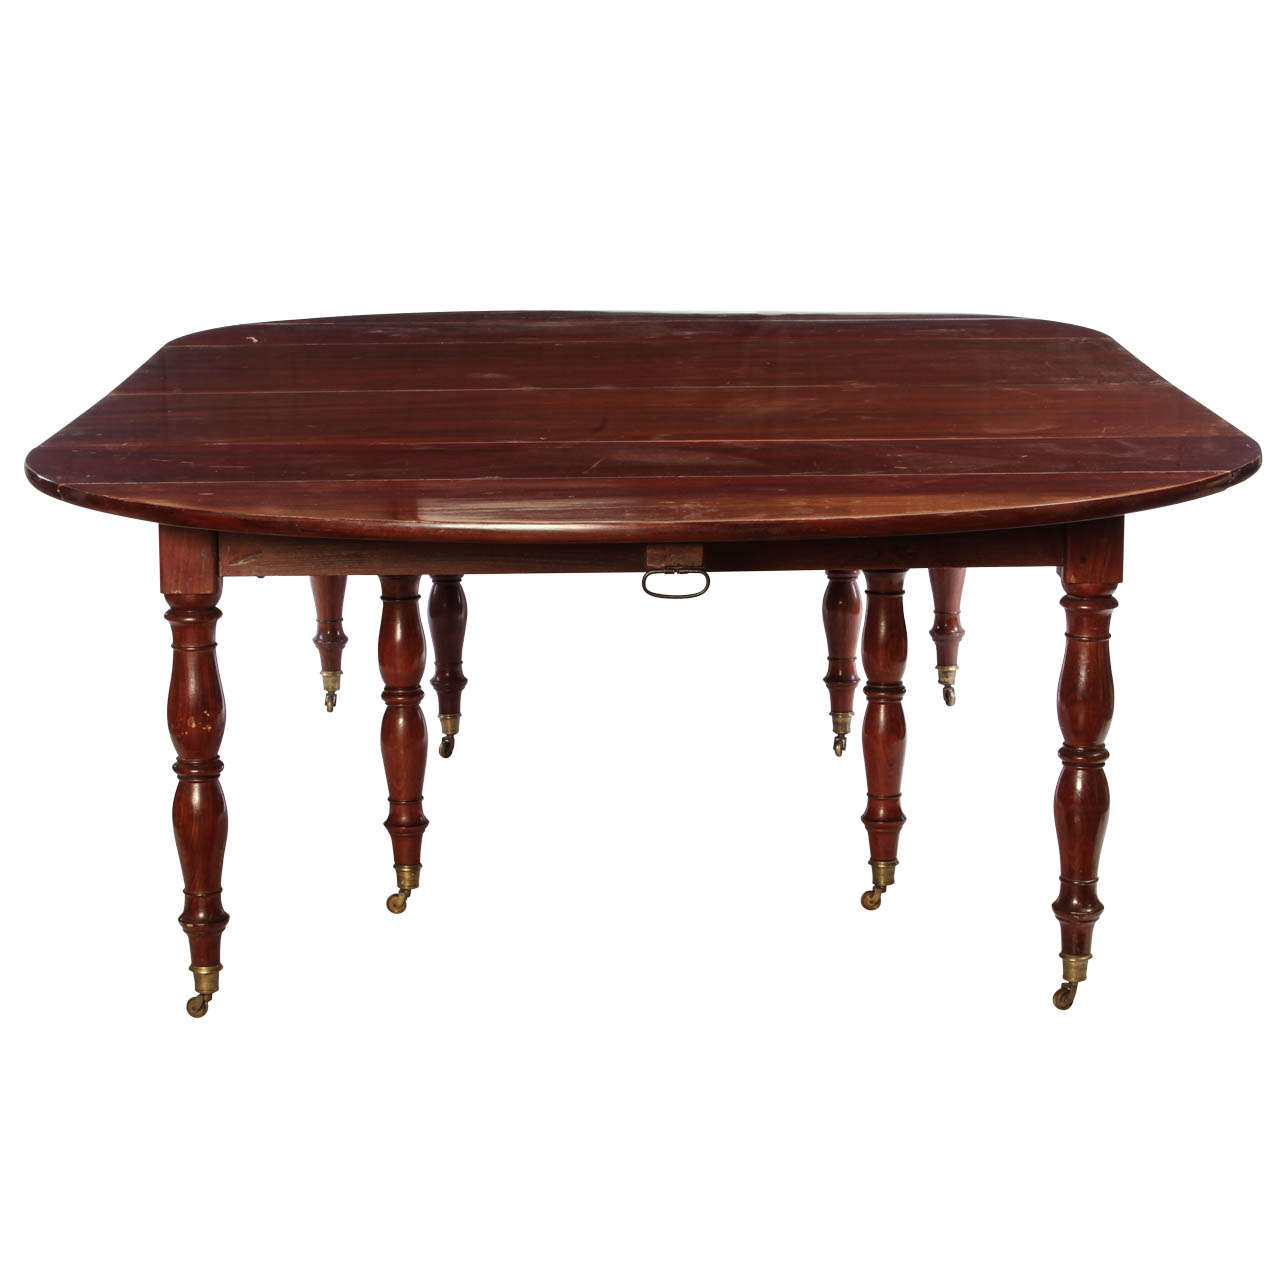 Fine French 18th Century Mahogany Extending Drop-Leaf Dining Table